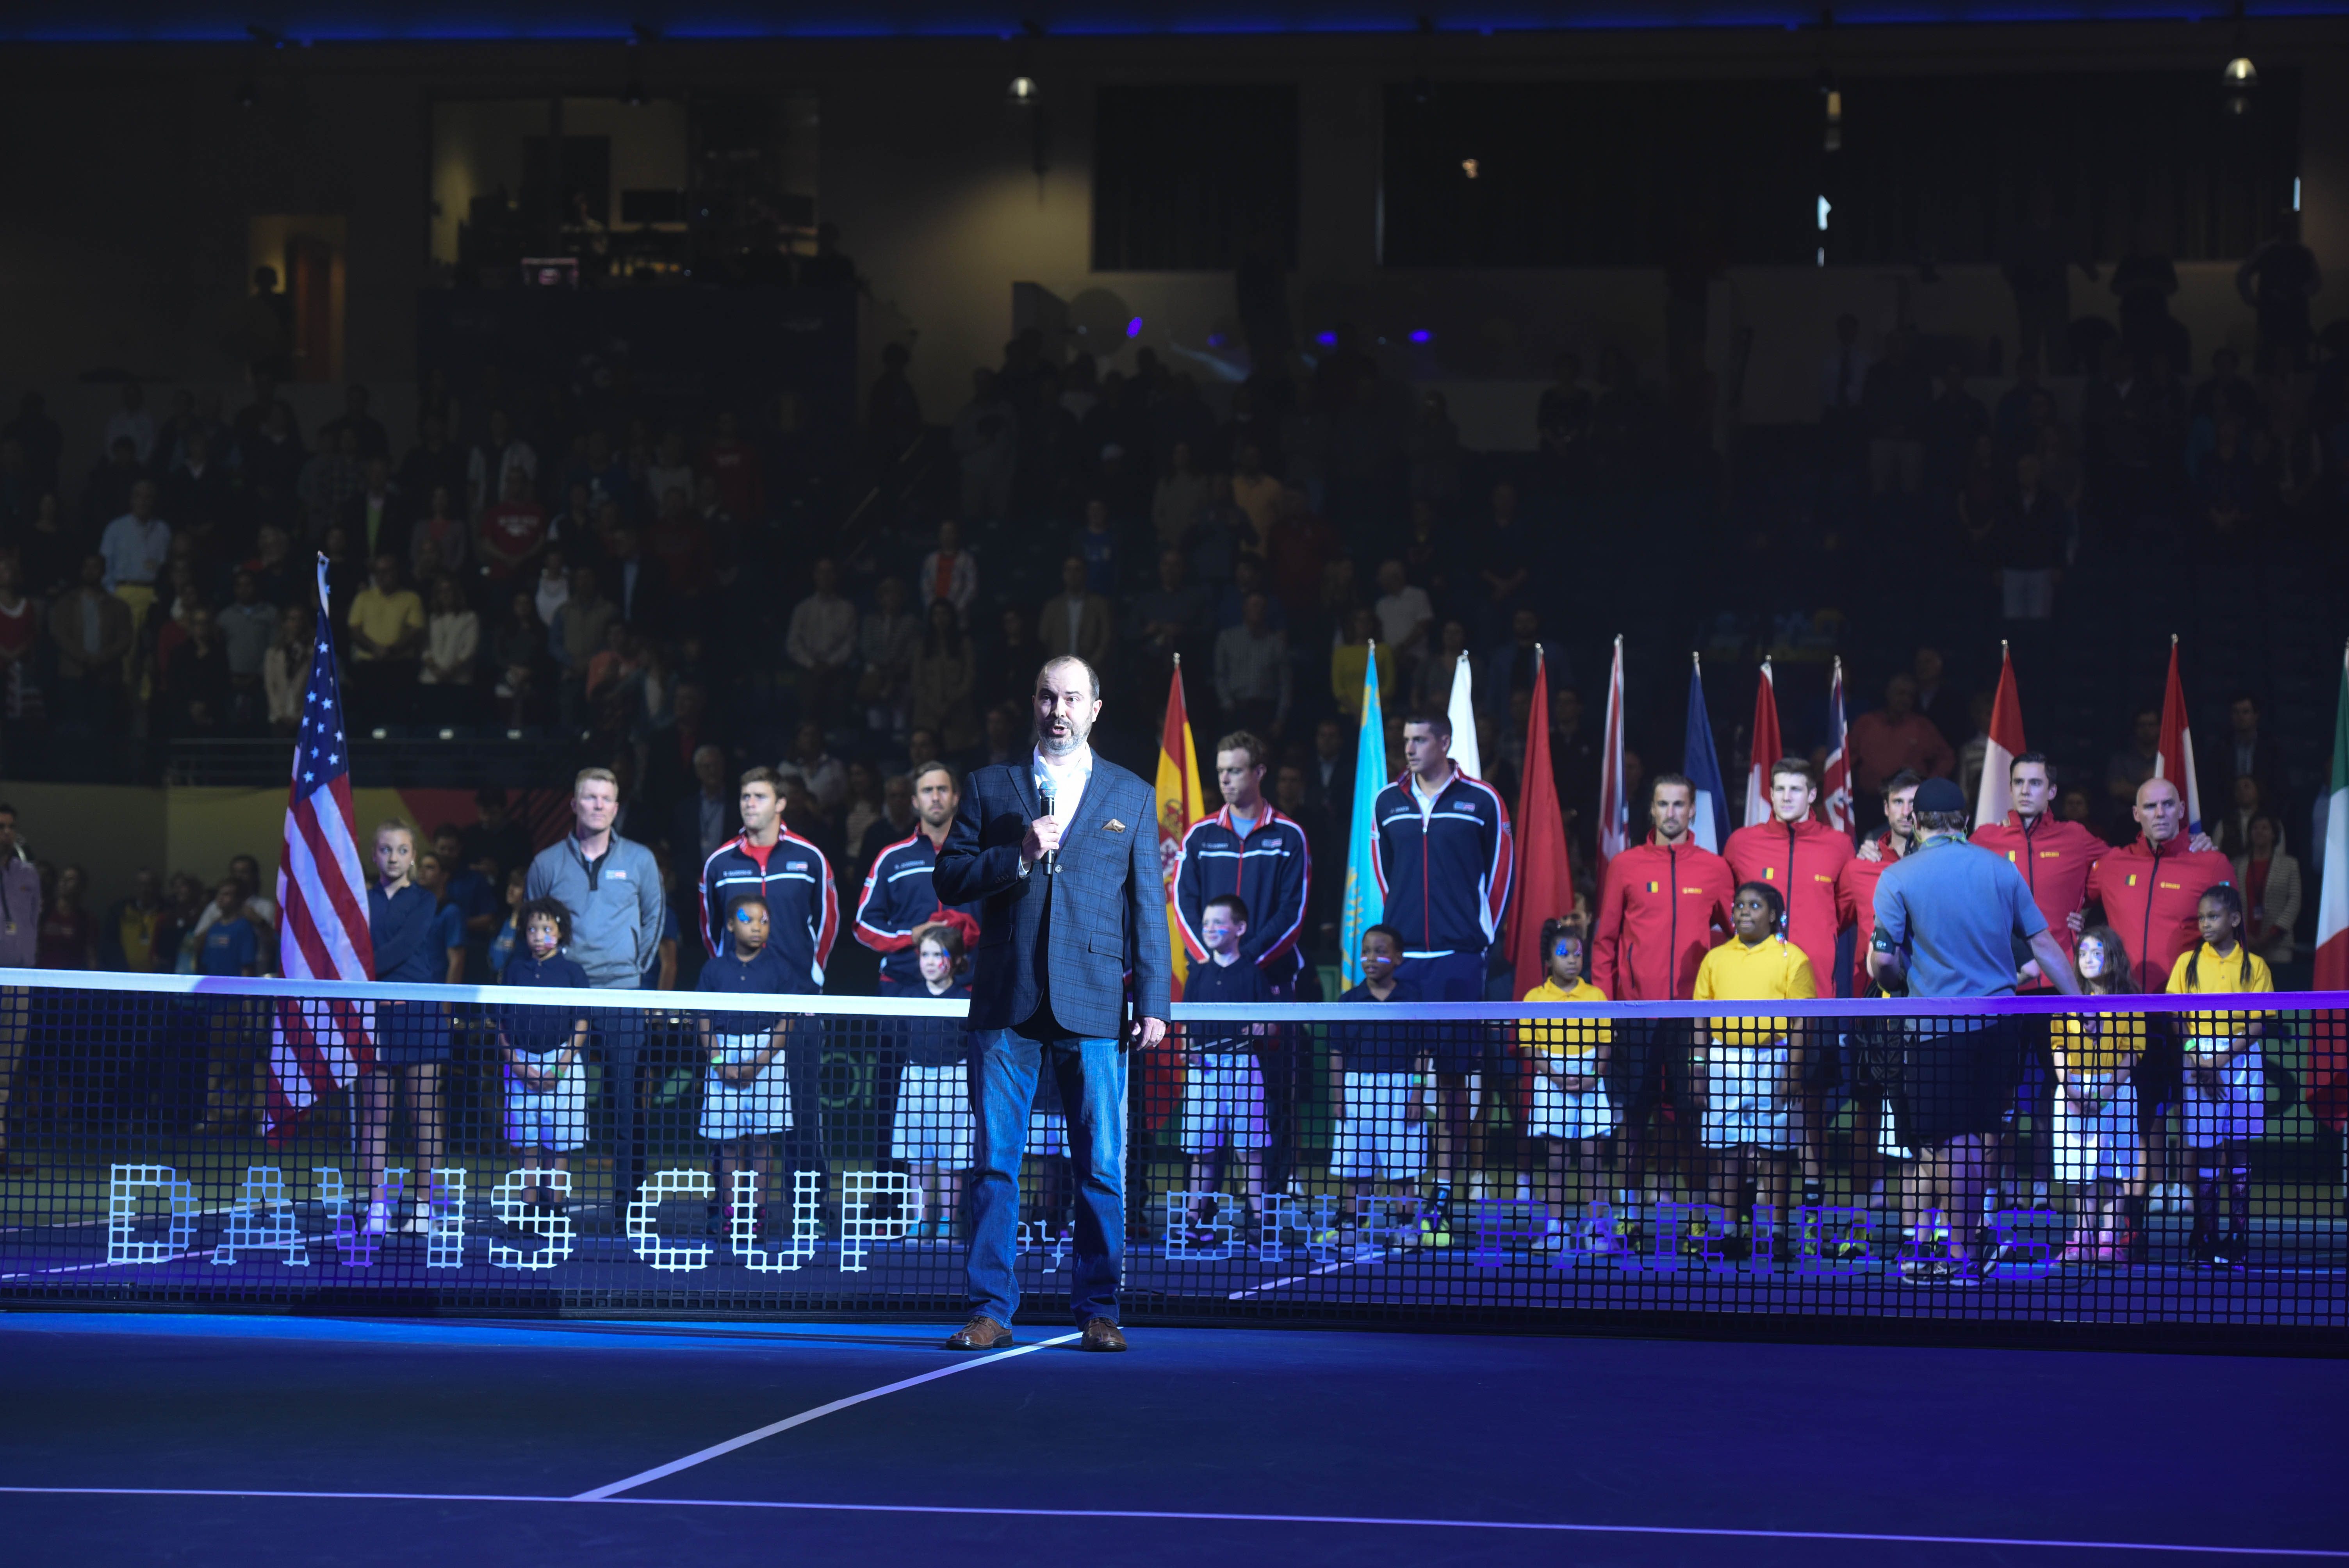 Mark Whatley performs the National Anthem at the Davis Cup on Friday night